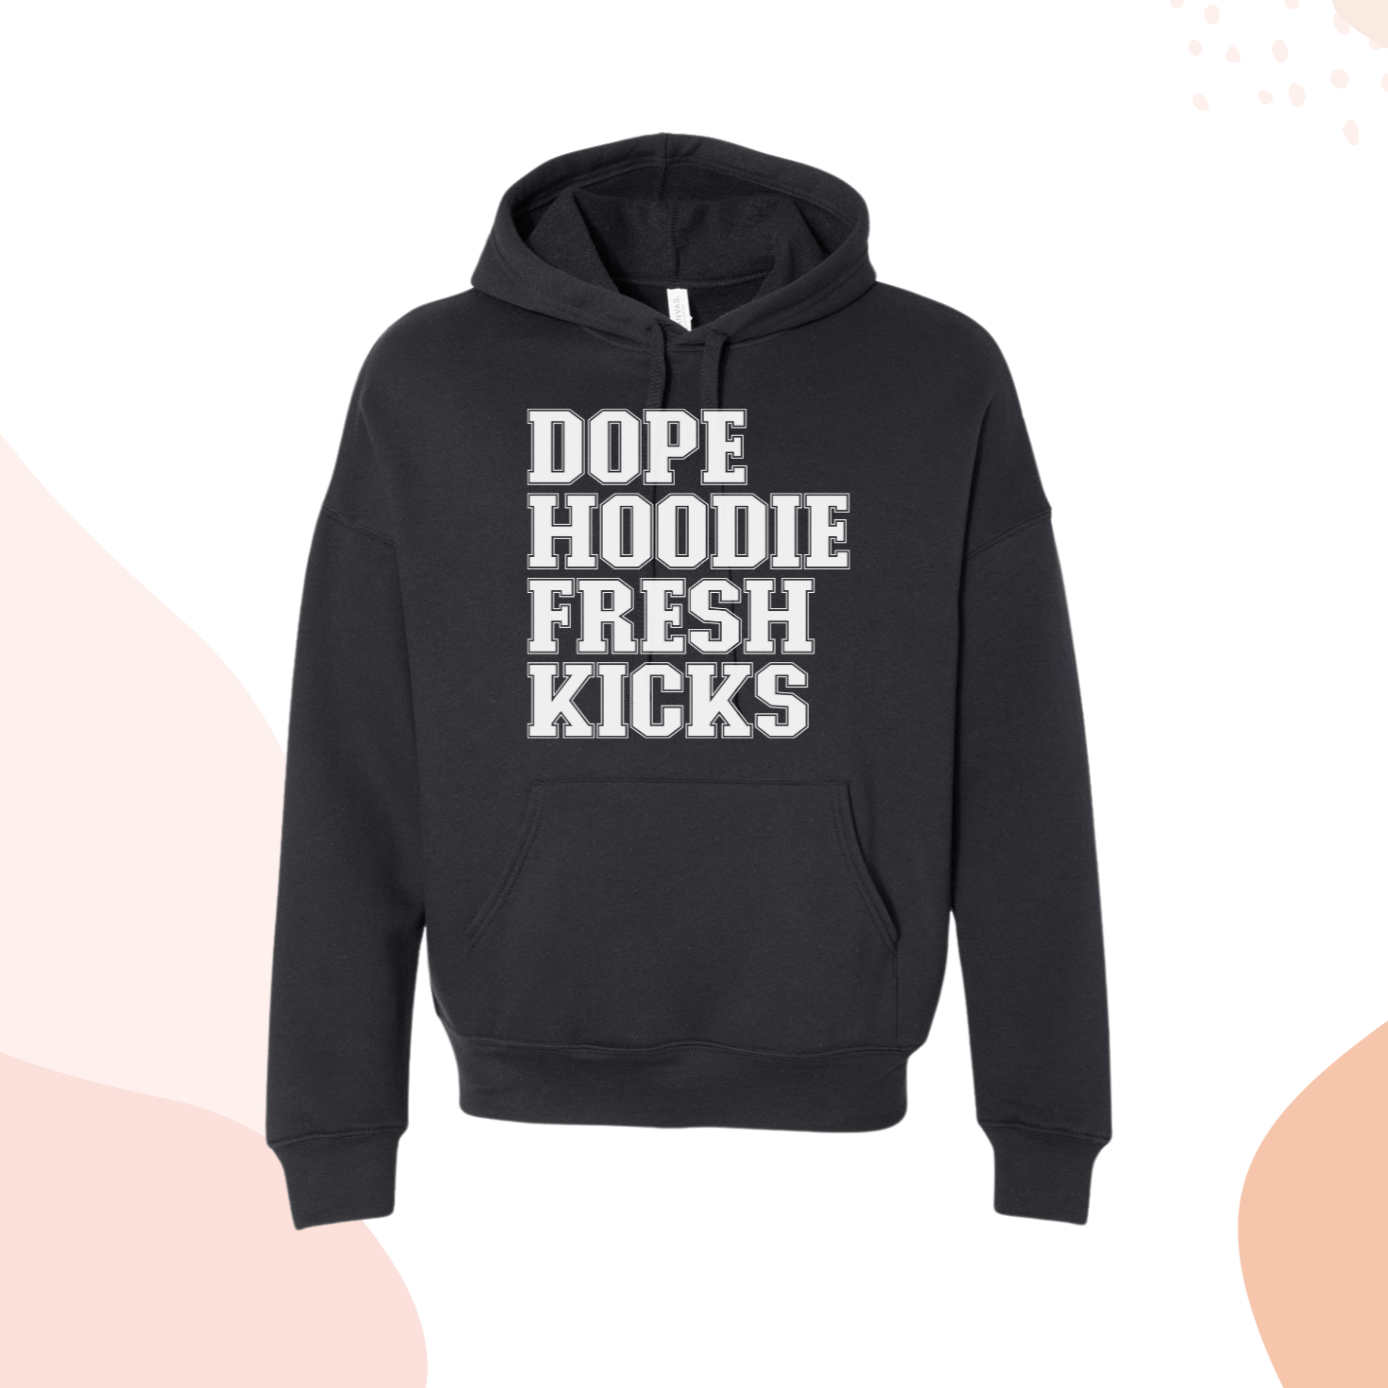 Black Hoodie Sweatshirt for Sneaker Head to Mach Shoes and Outfit